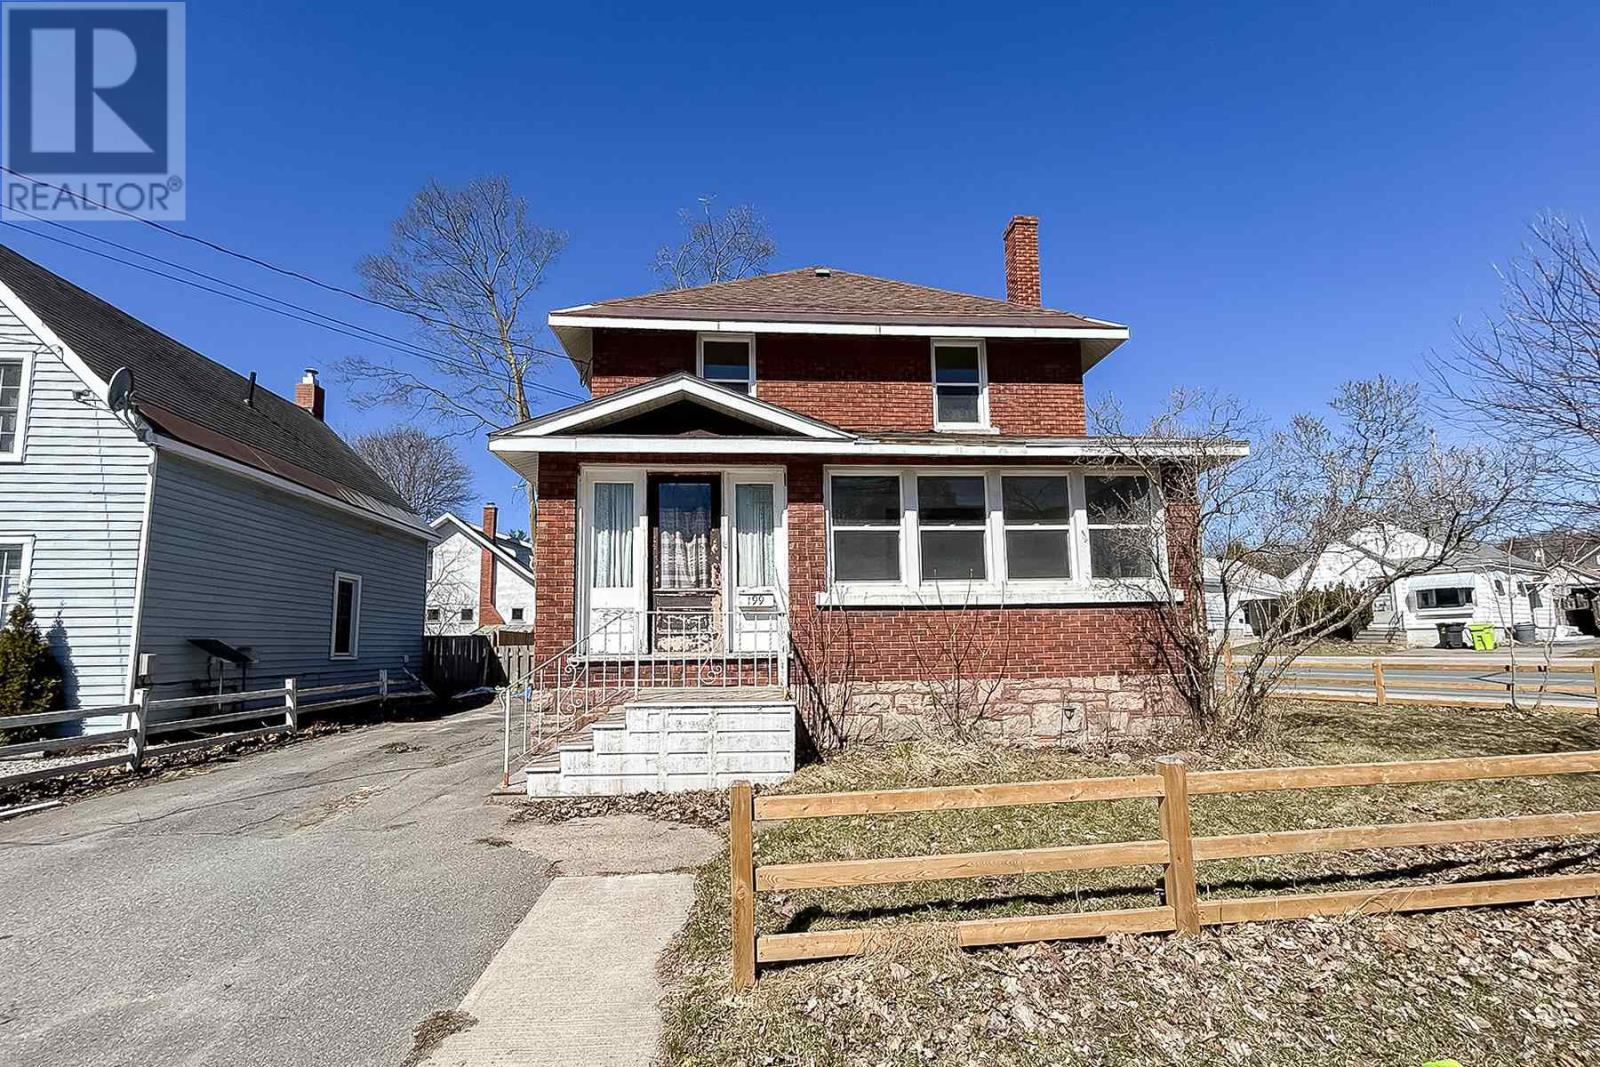 Sault Ste. Marie, 3 Bedrooms Bedrooms, ,1 BathroomBathrooms,Single Family,For Sale,SM240720